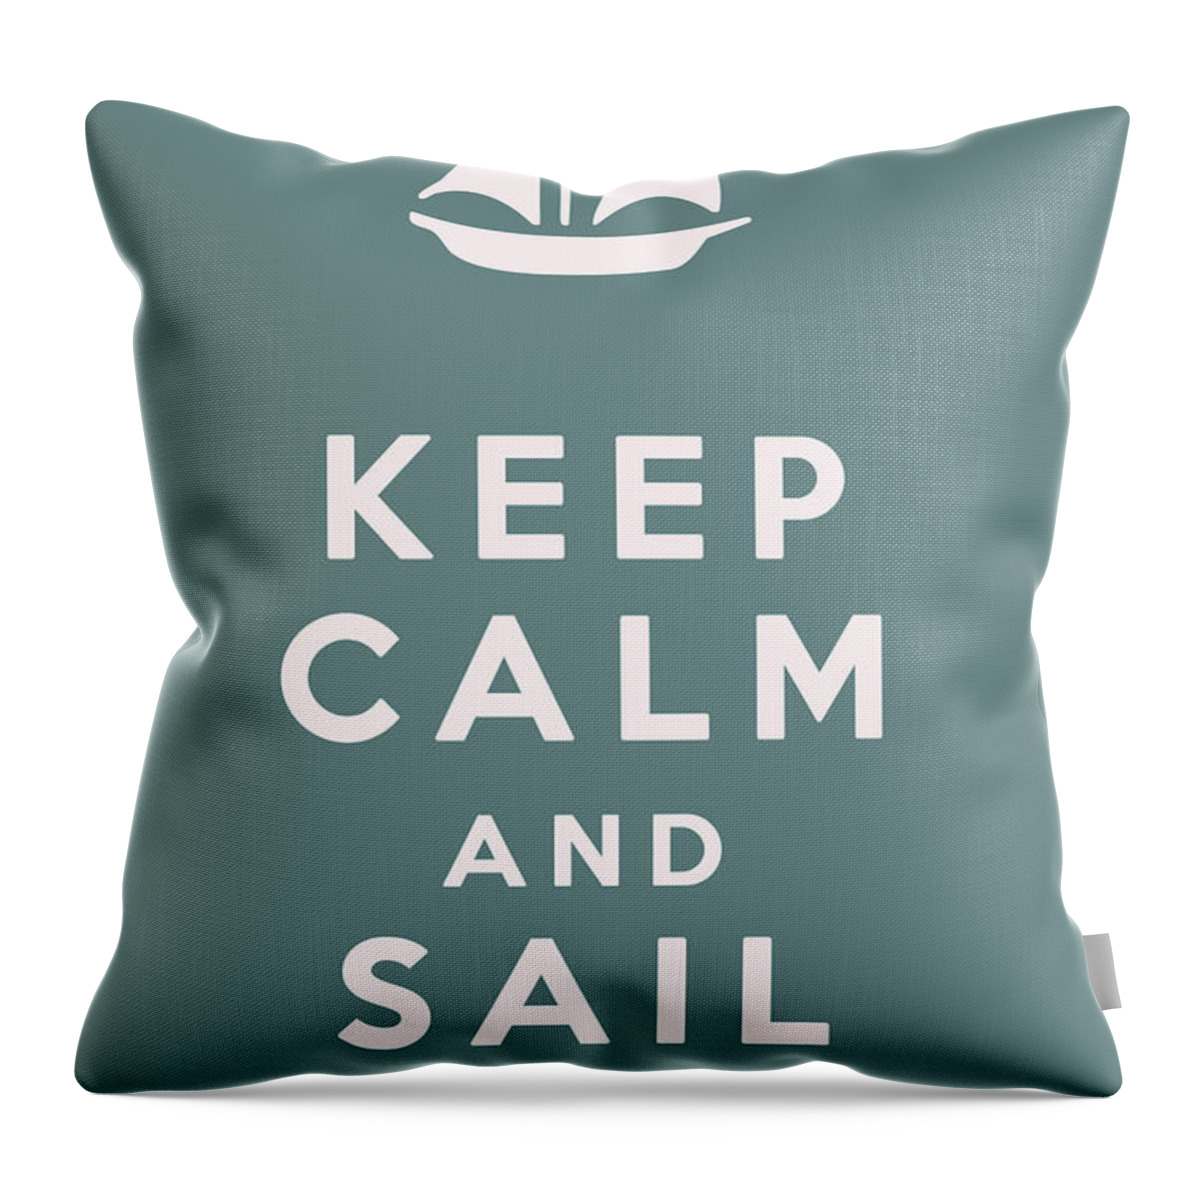 Keep Calm And Sail On Throw Pillow featuring the digital art Keep Calm and Sail On by Georgia Clare